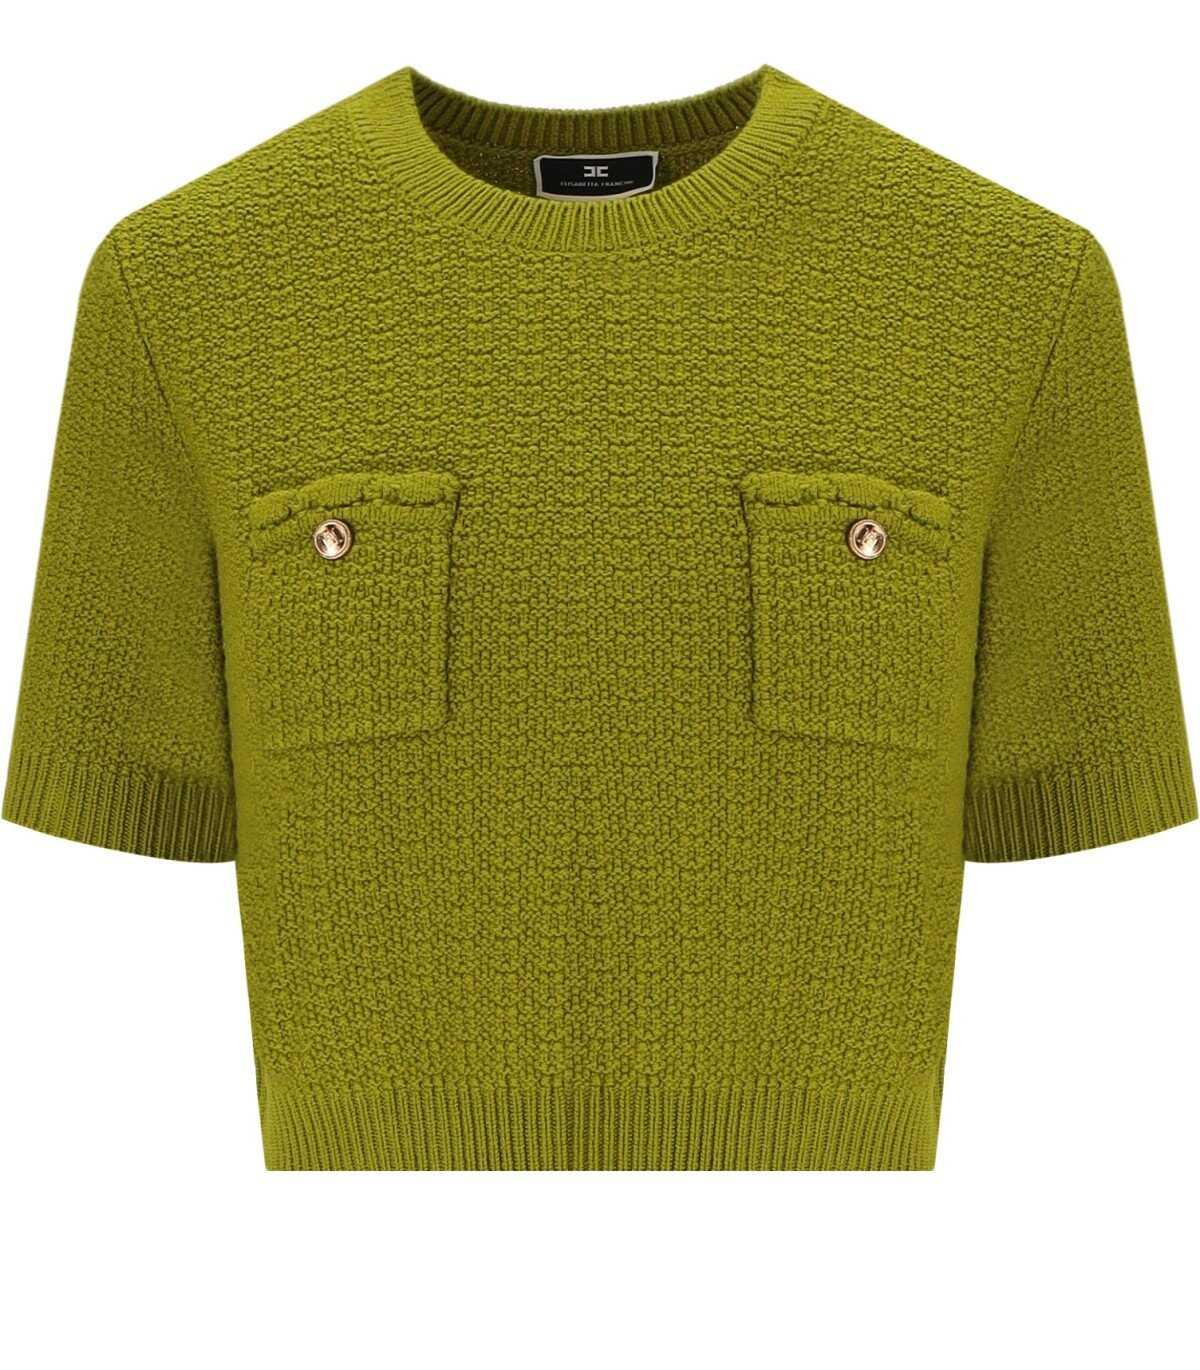 Elisabetta Franchi ELISABETTA FRANCHI OLIVE CROPPED KNITTED T-SHIRT WITH BUTTONS Green